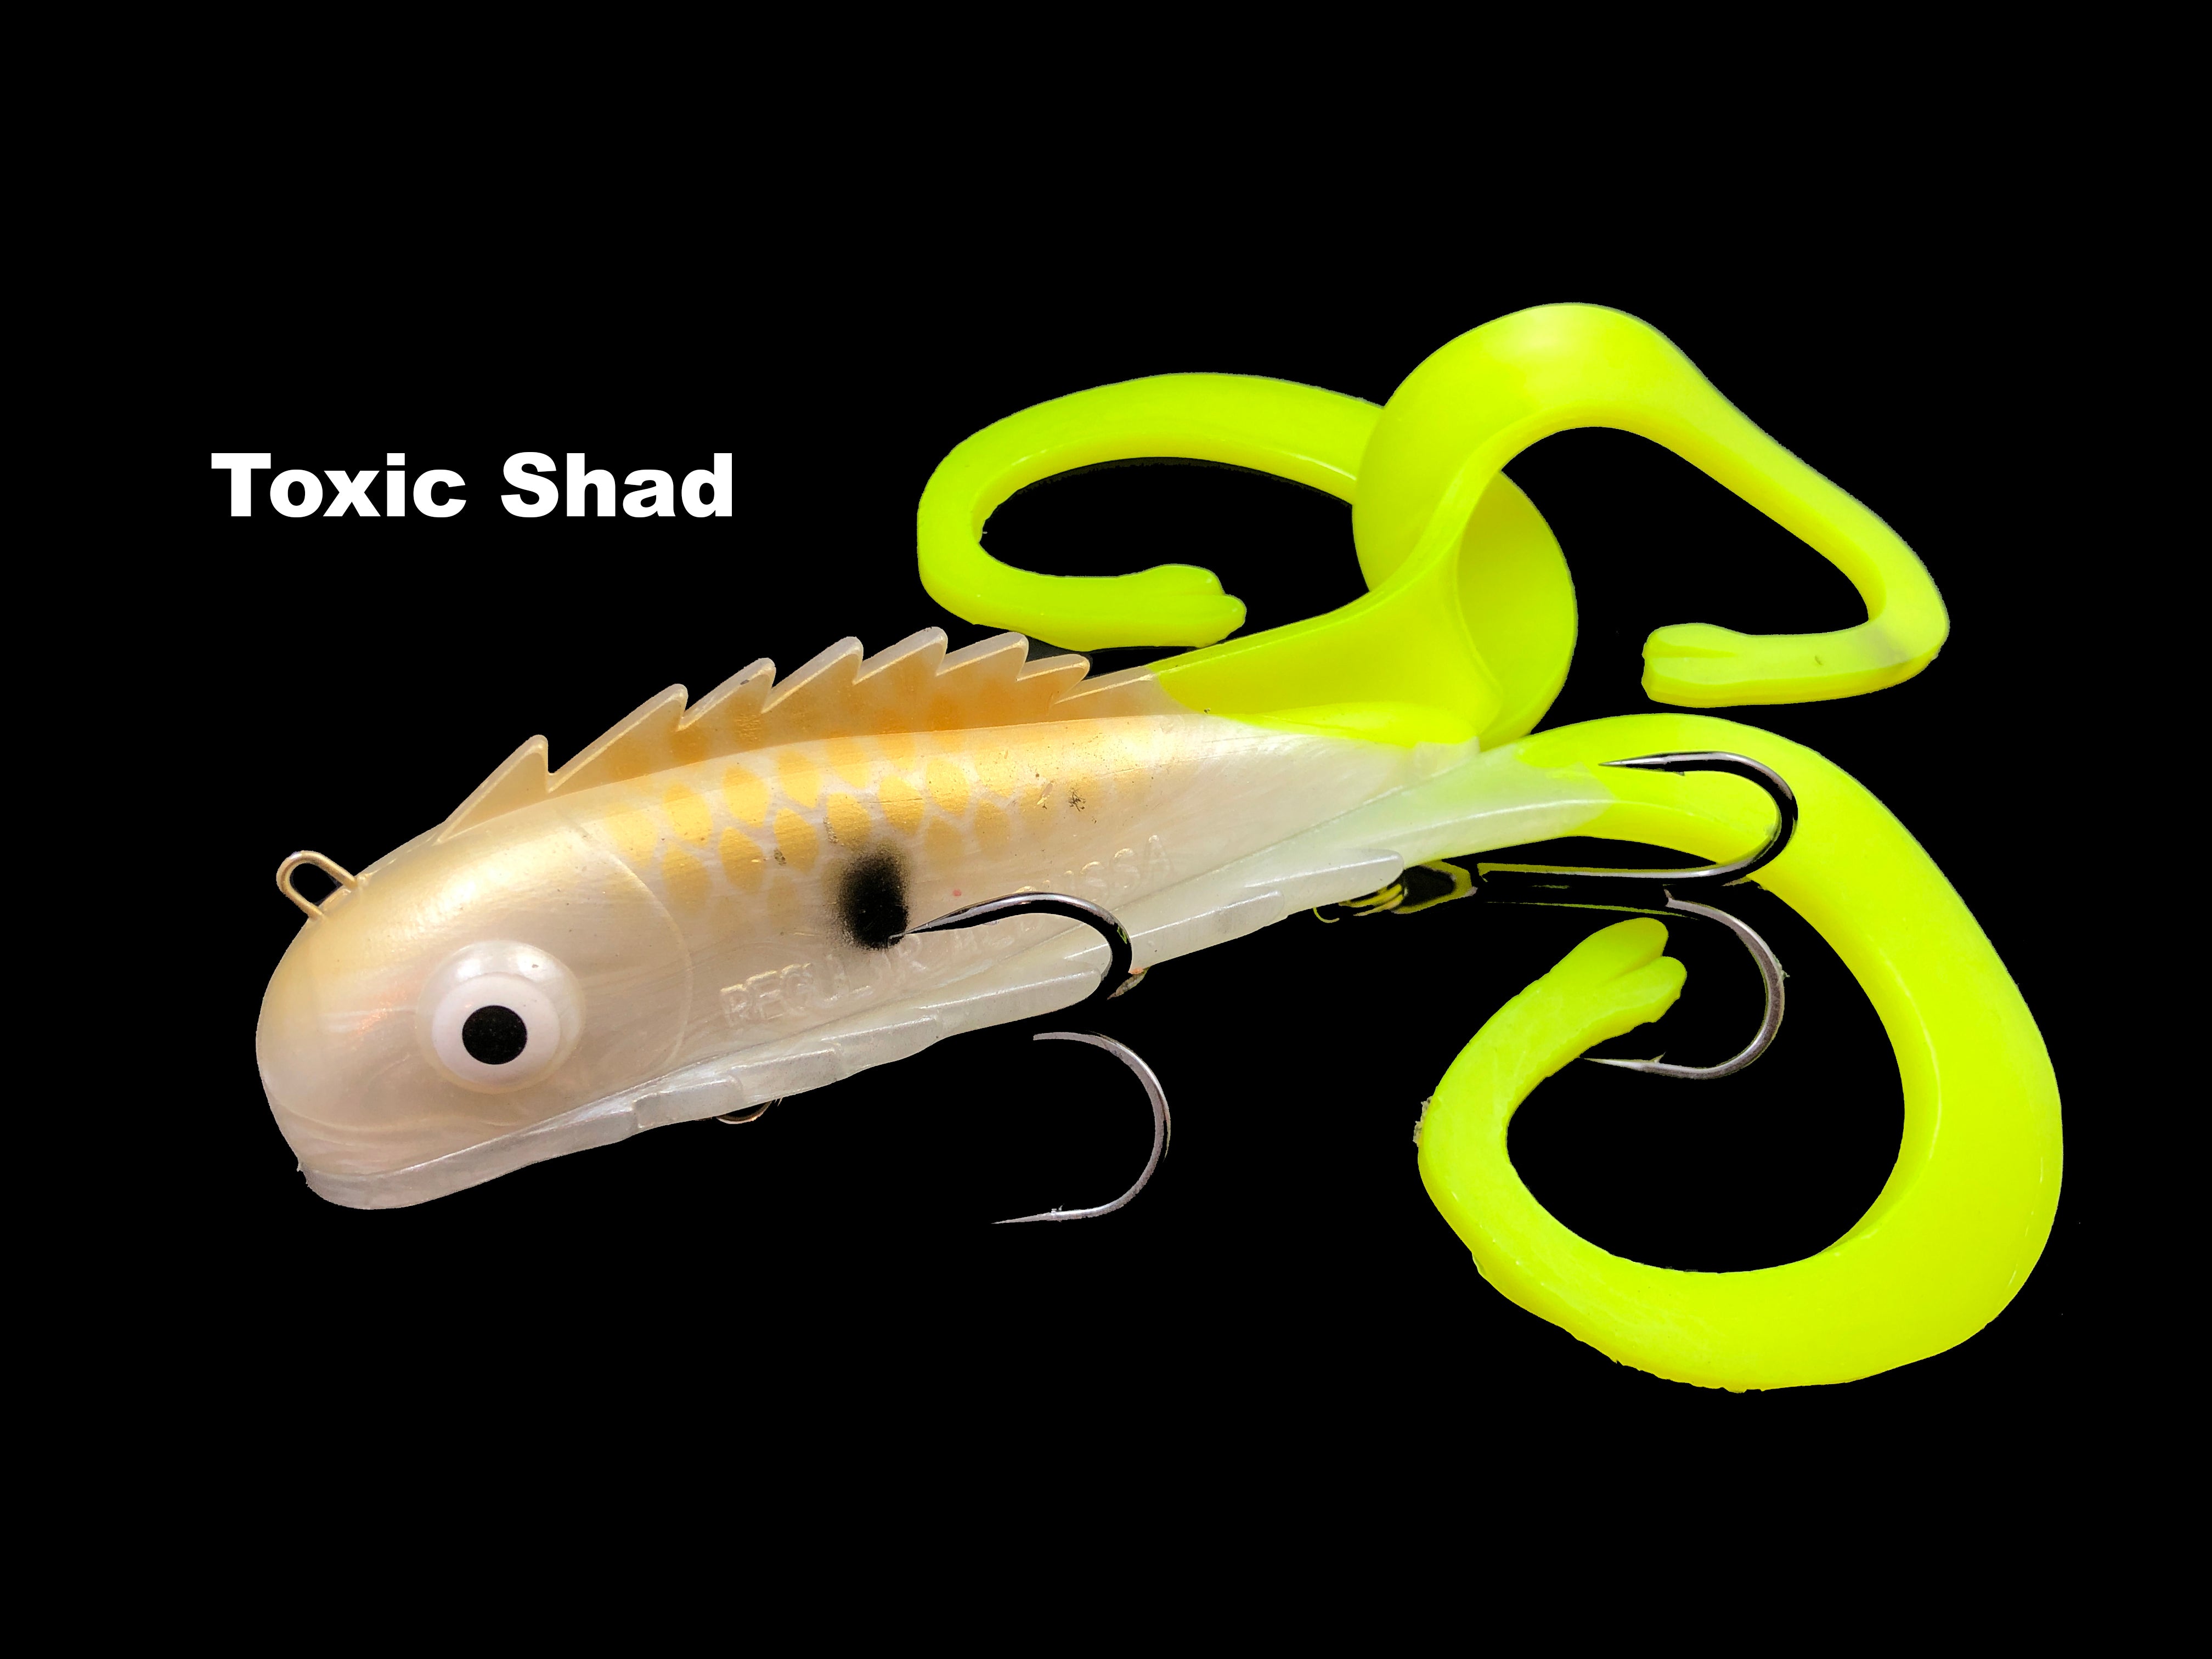 MuskieFIRST  Favorite medussa color » Lures,Tackle, and Equipment » Muskie  Fishing